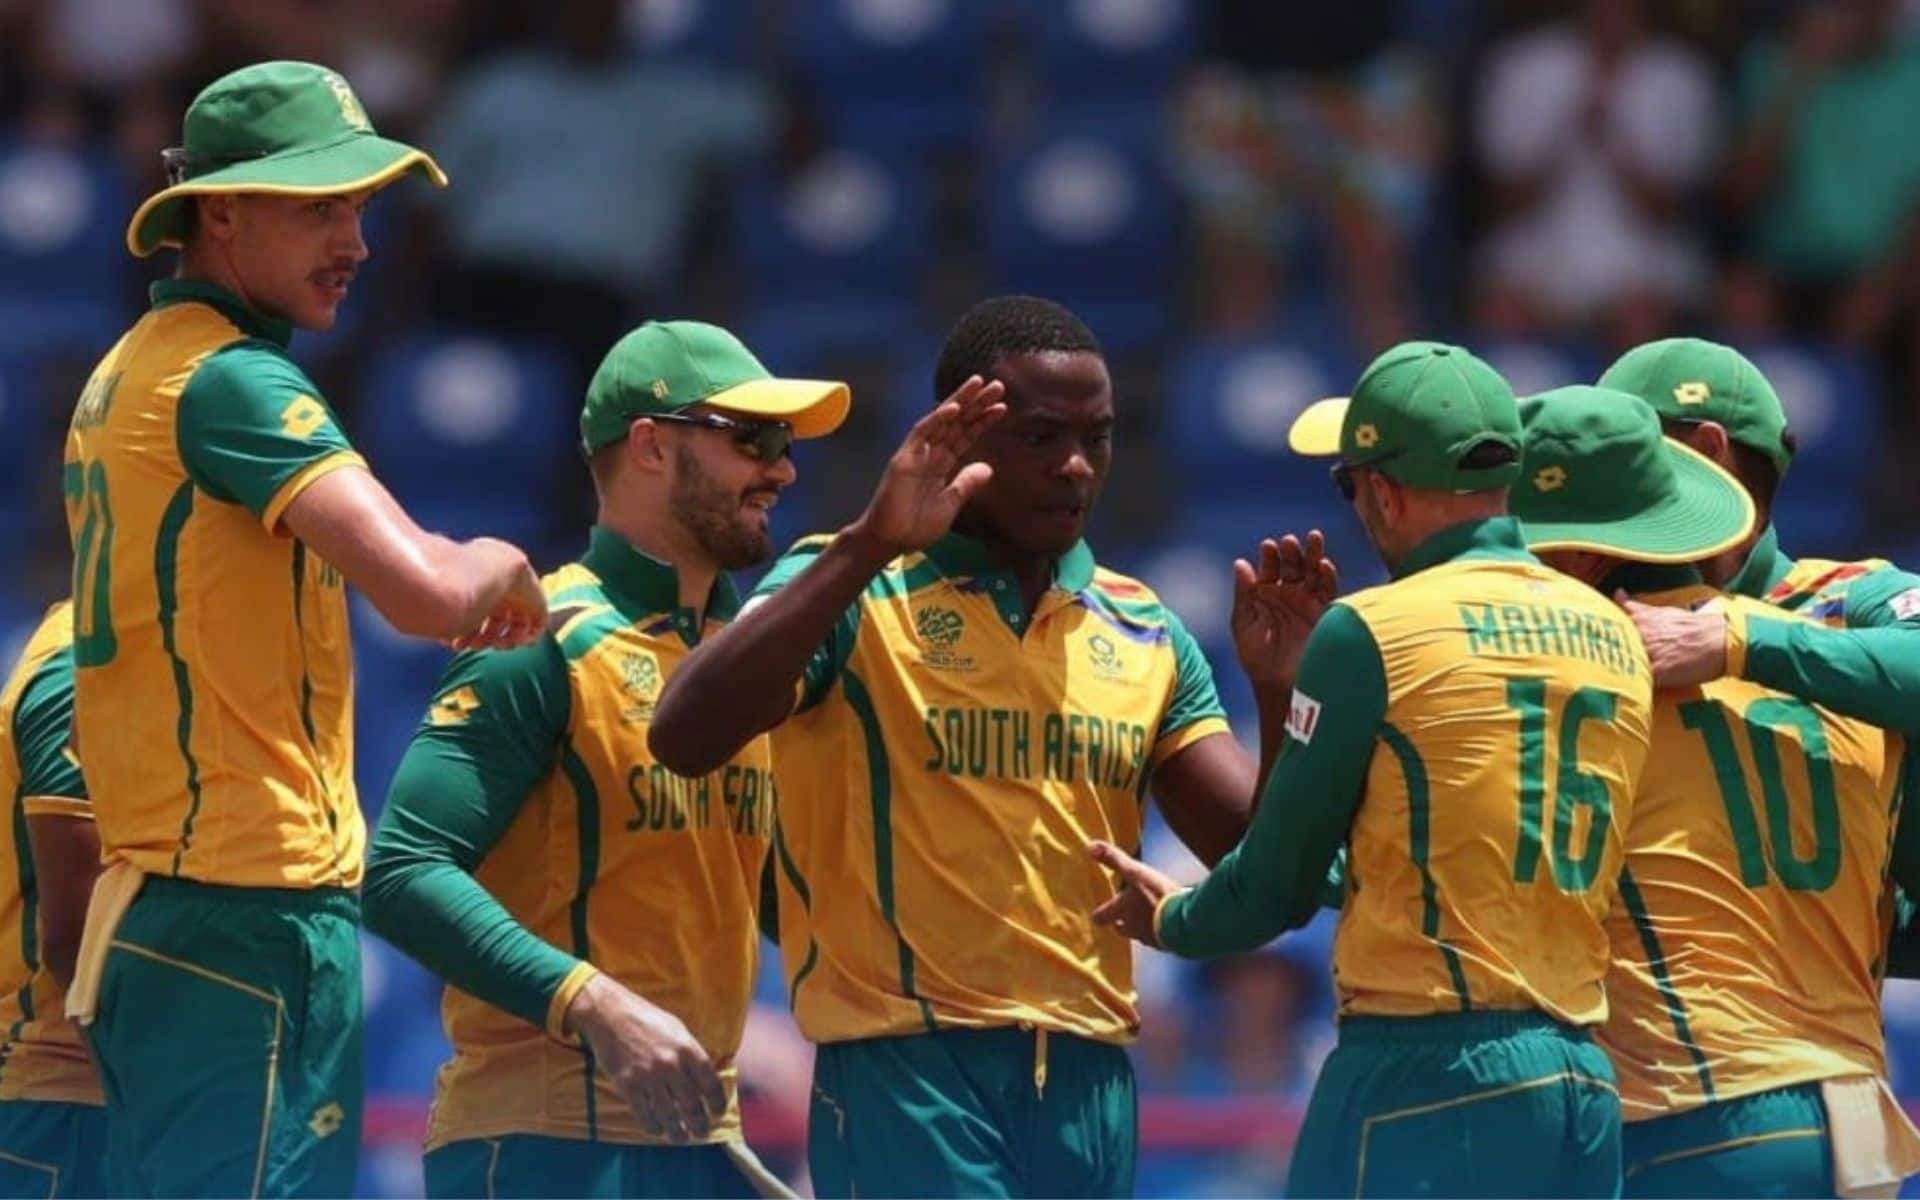 South Africa topples England in T20 WC Super 8 round (X.com)